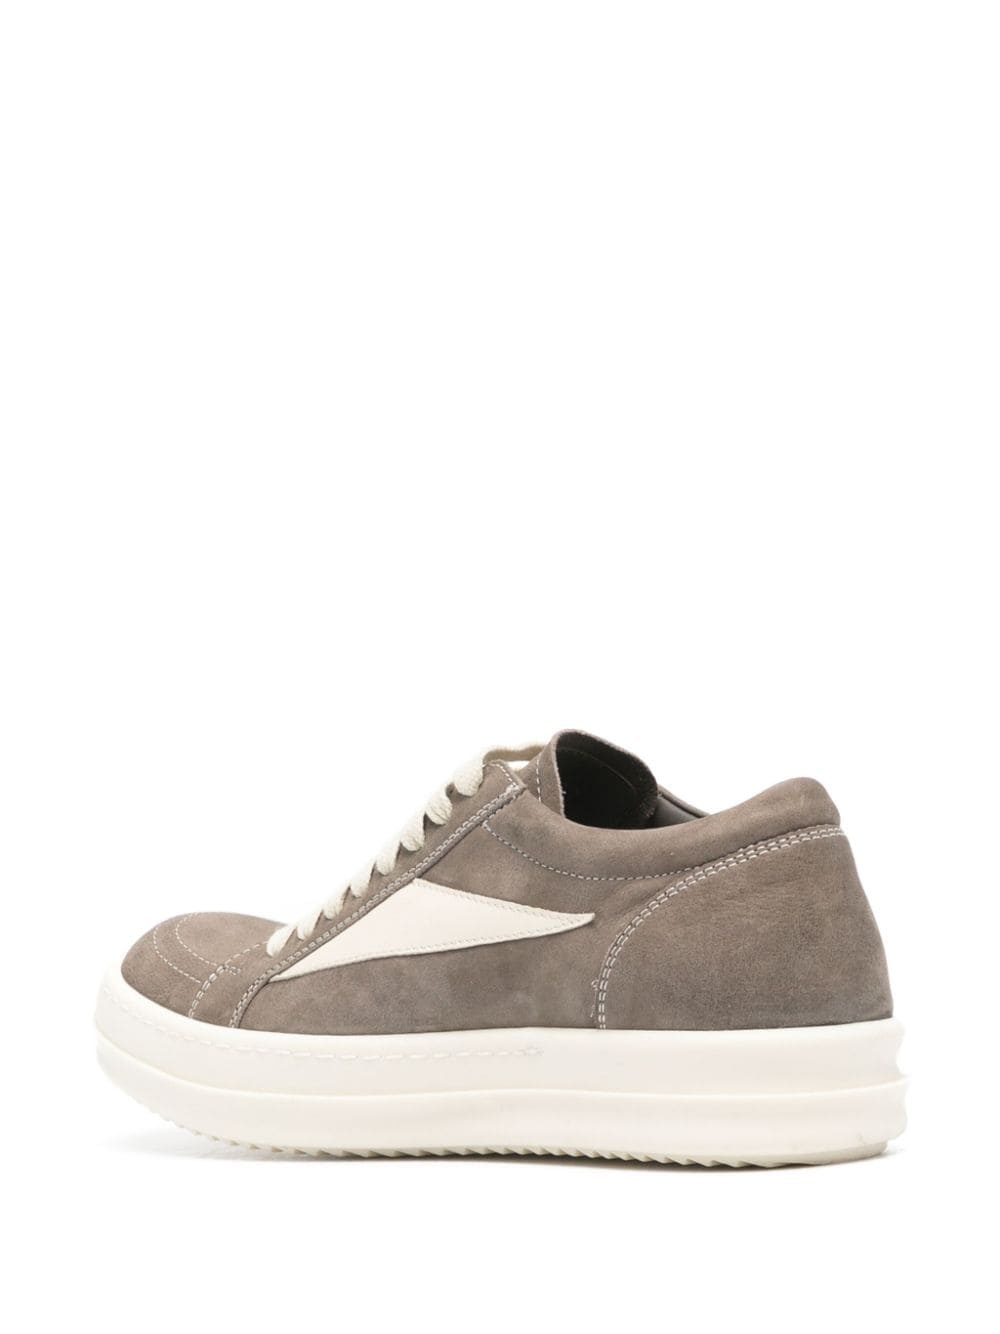 patch-detail suede sneakers - 3